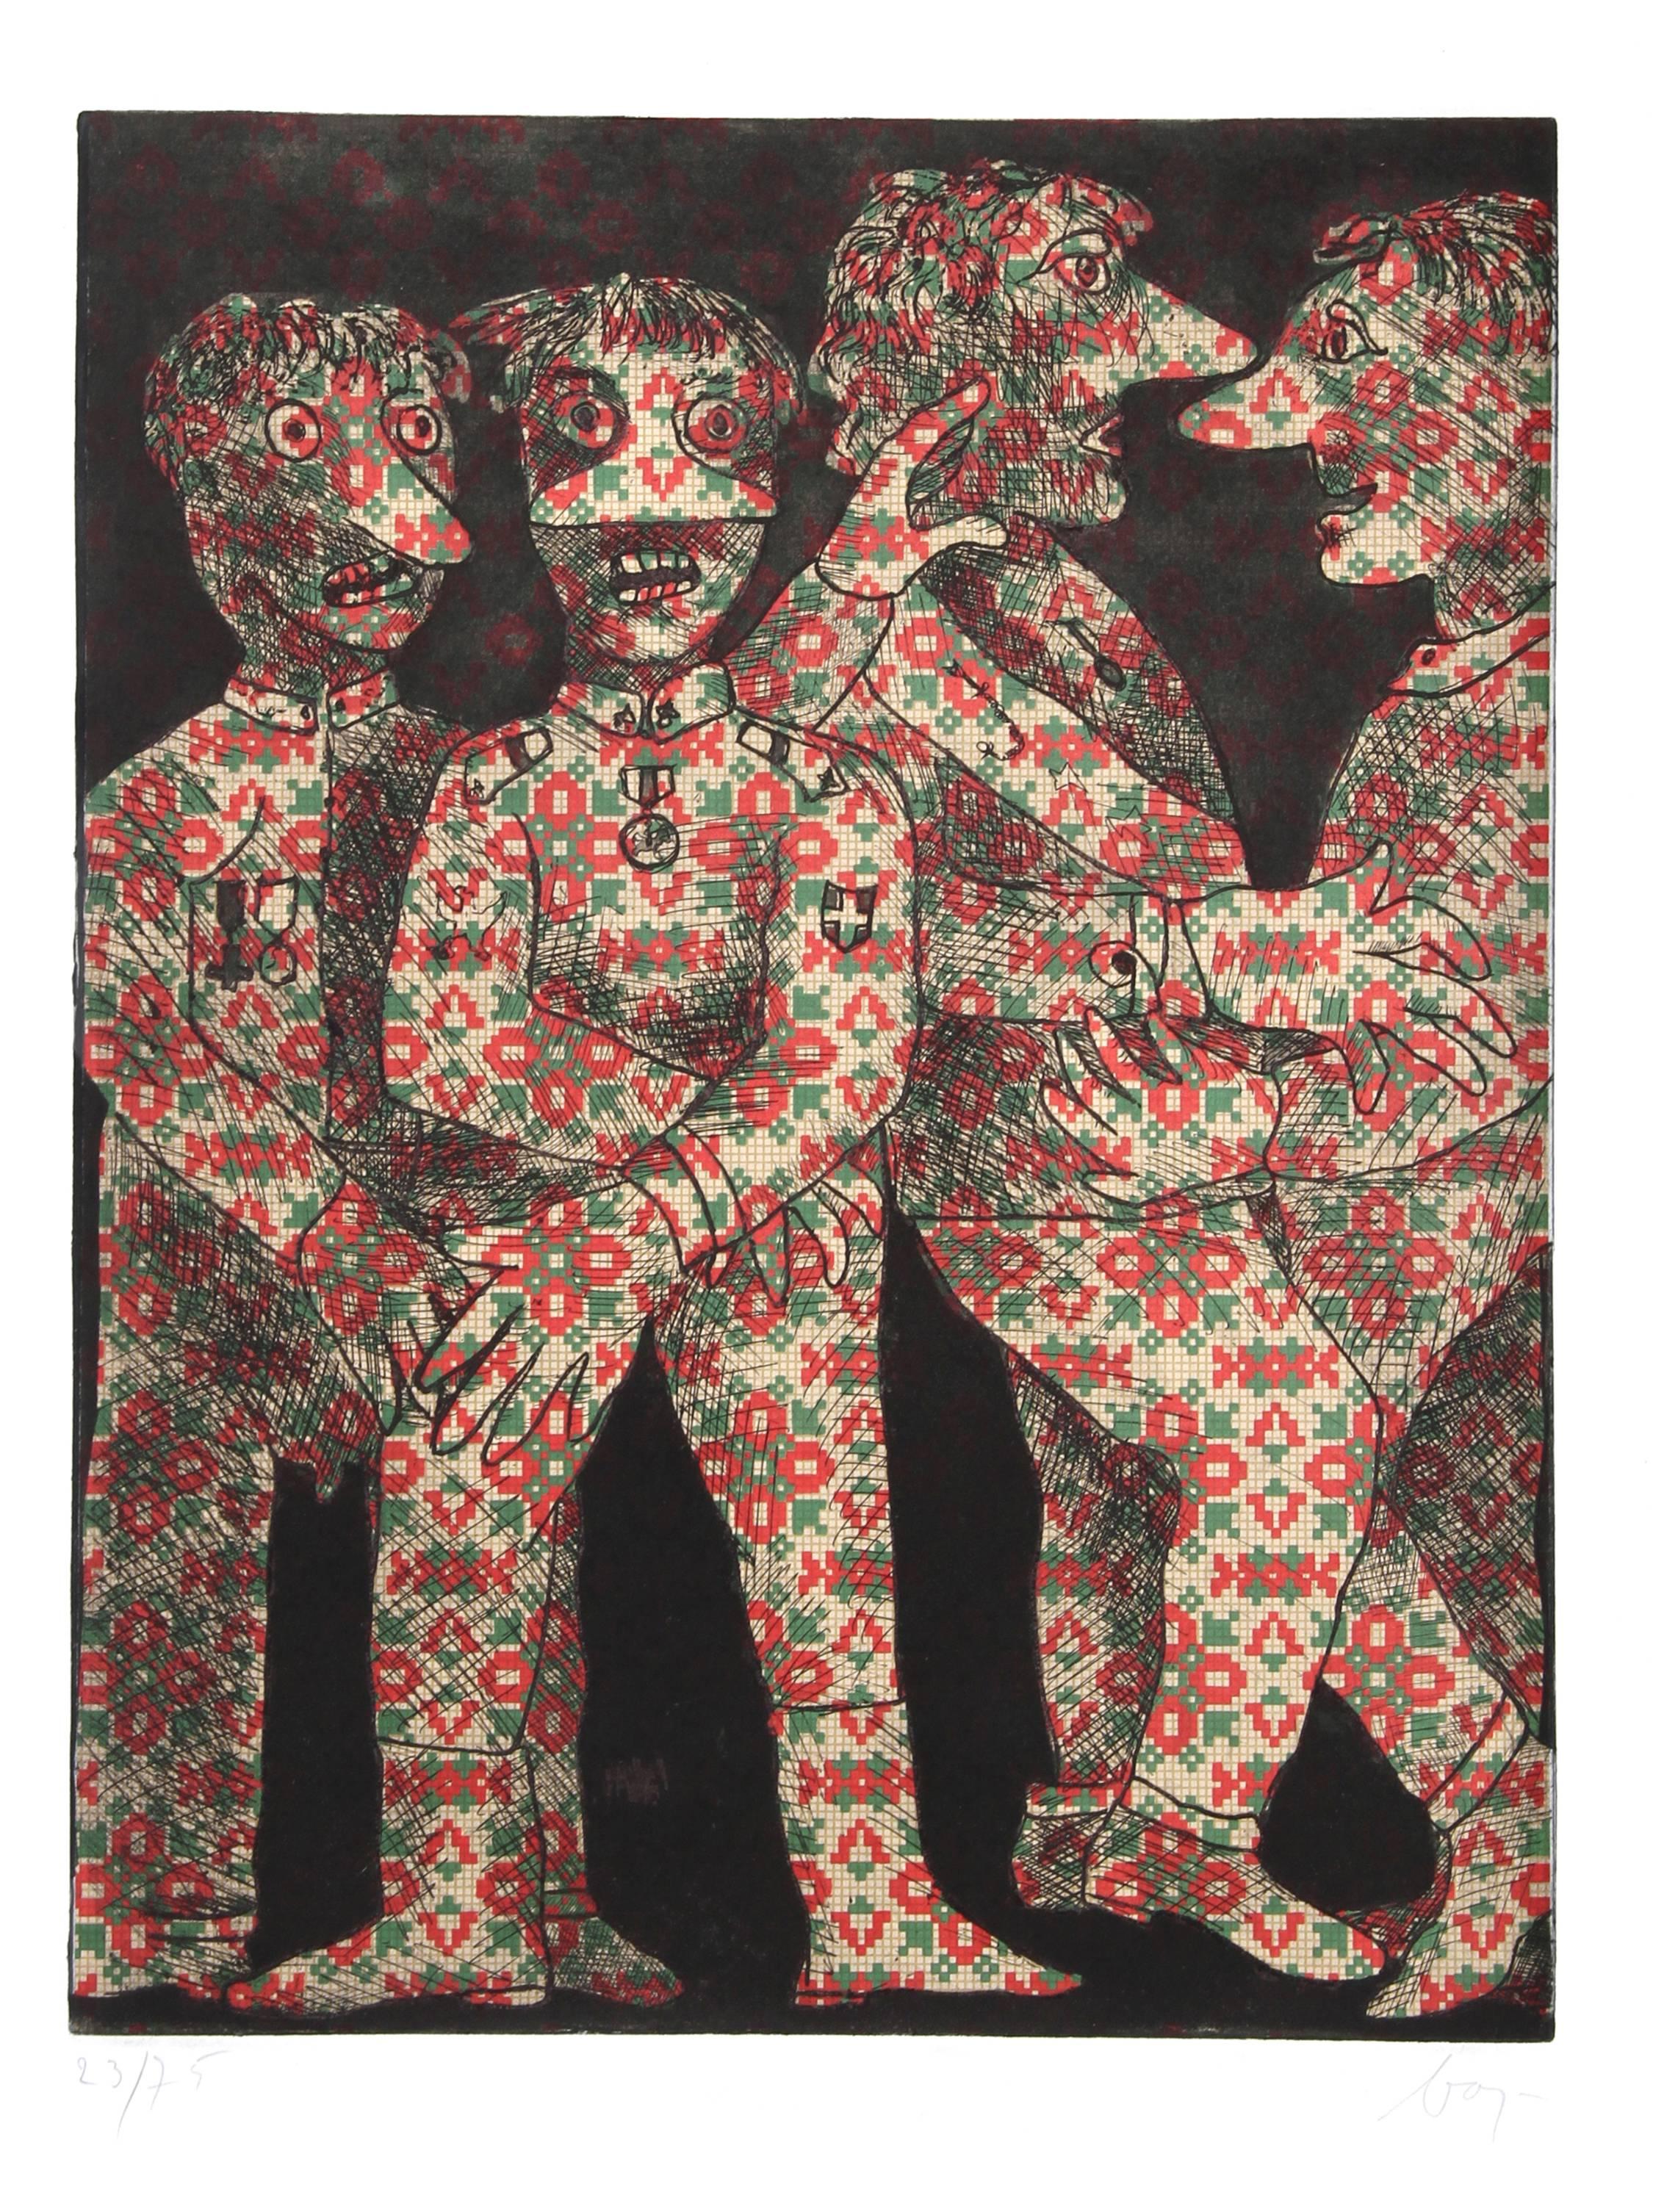 Artist: Enrico Baj, Italian (1924 - 2003)
Title: Four Dancing Military Men
Medium: Aquatint Etching, signed and numbered in pencil
Edition: 23/75
Image Size: 19.5 x 15 inches
Size: 27.5 in. x 19.5 in. (69.85 cm x 49.53 cm)